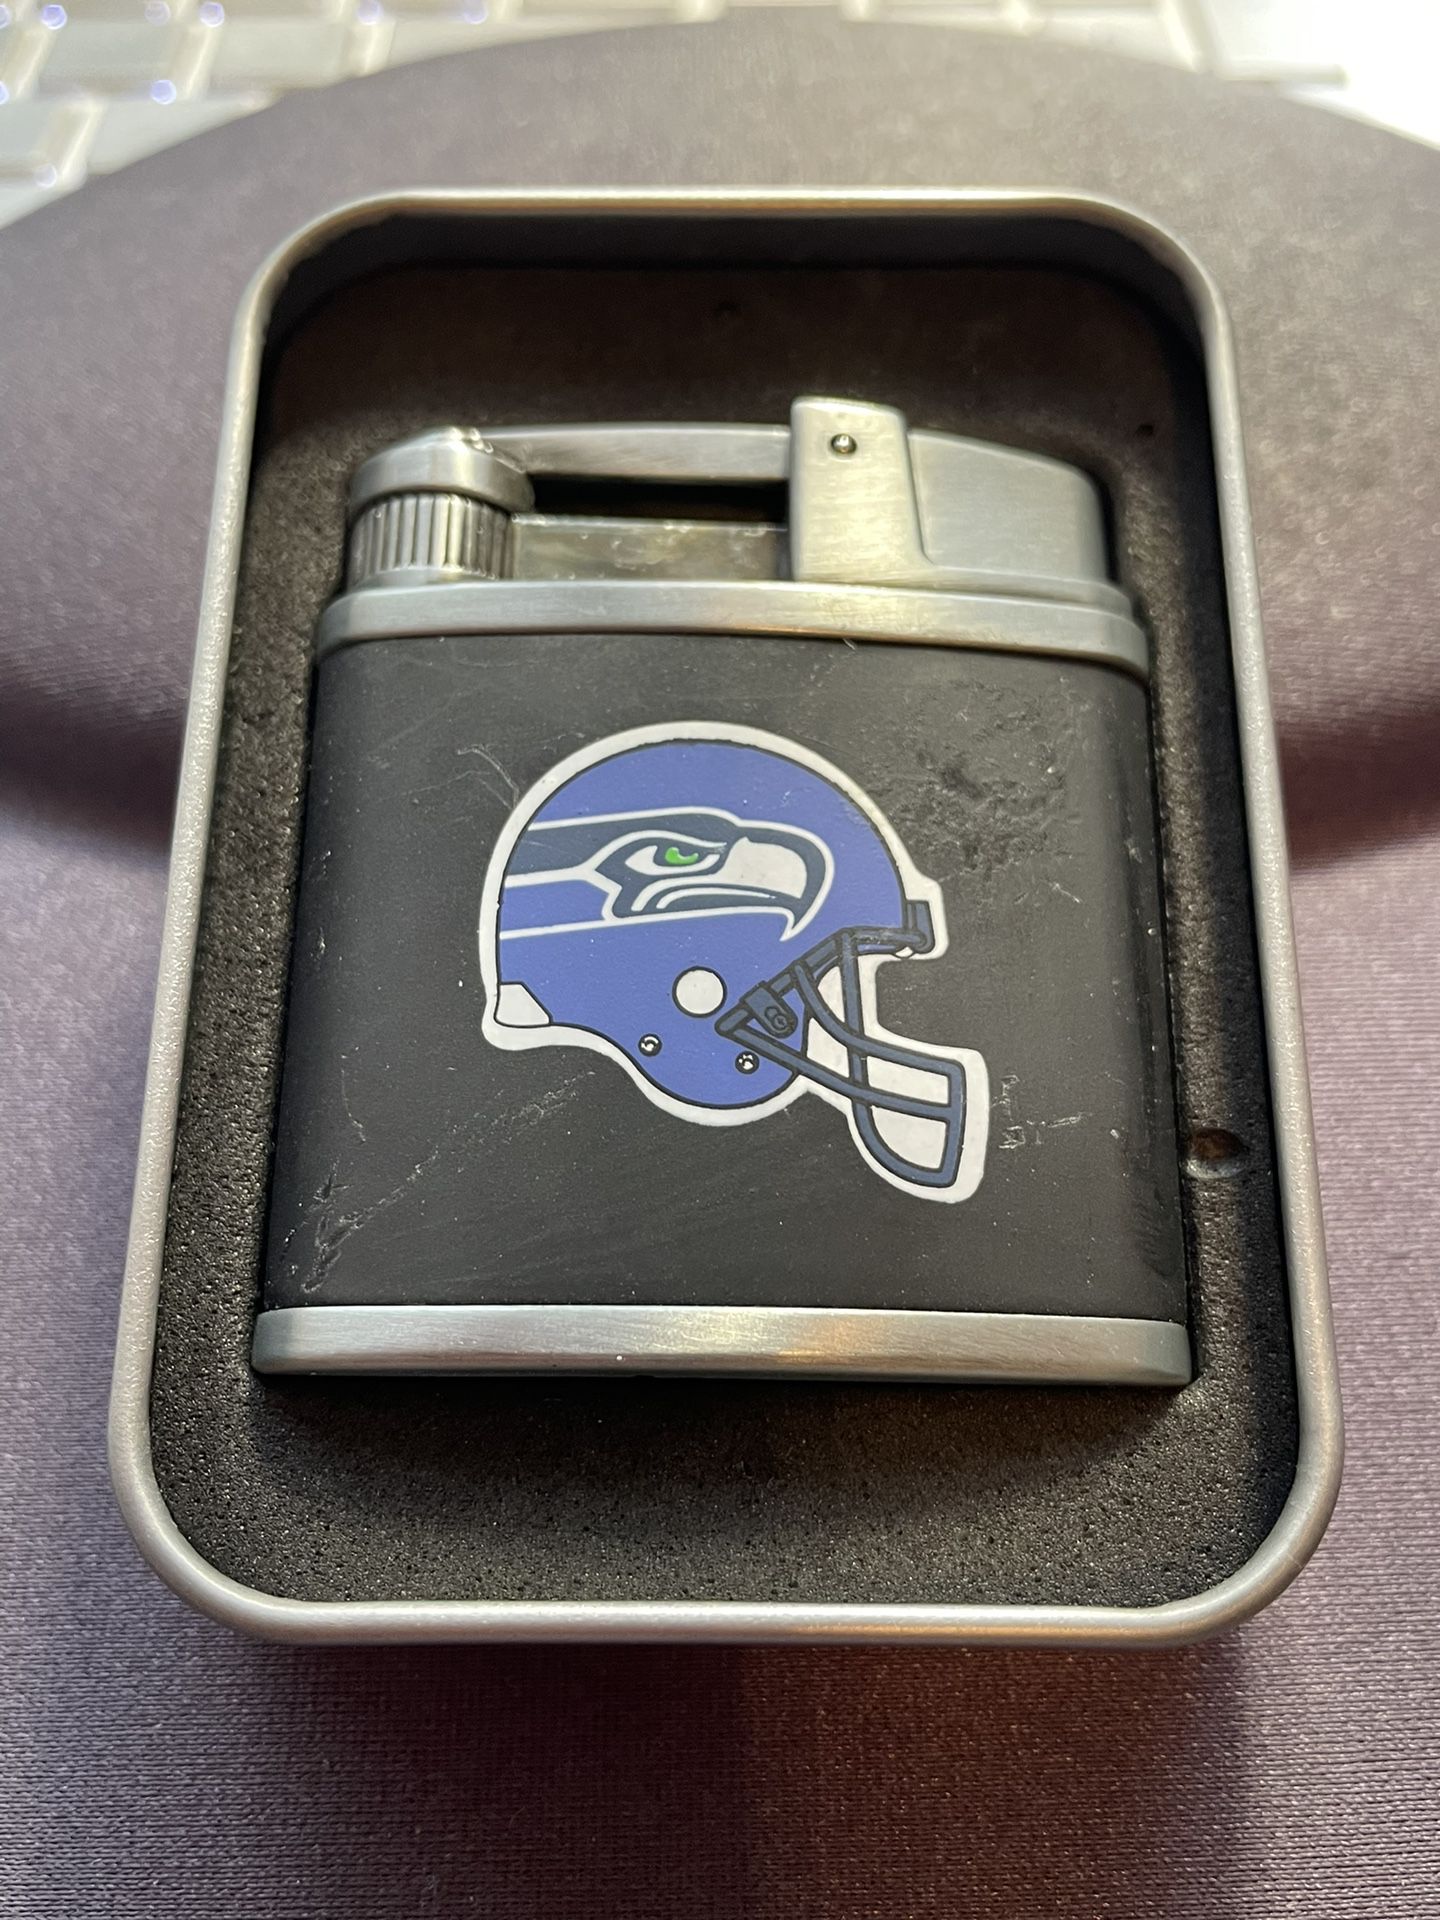 Seattle Seahawks NFL Collectible Lighter